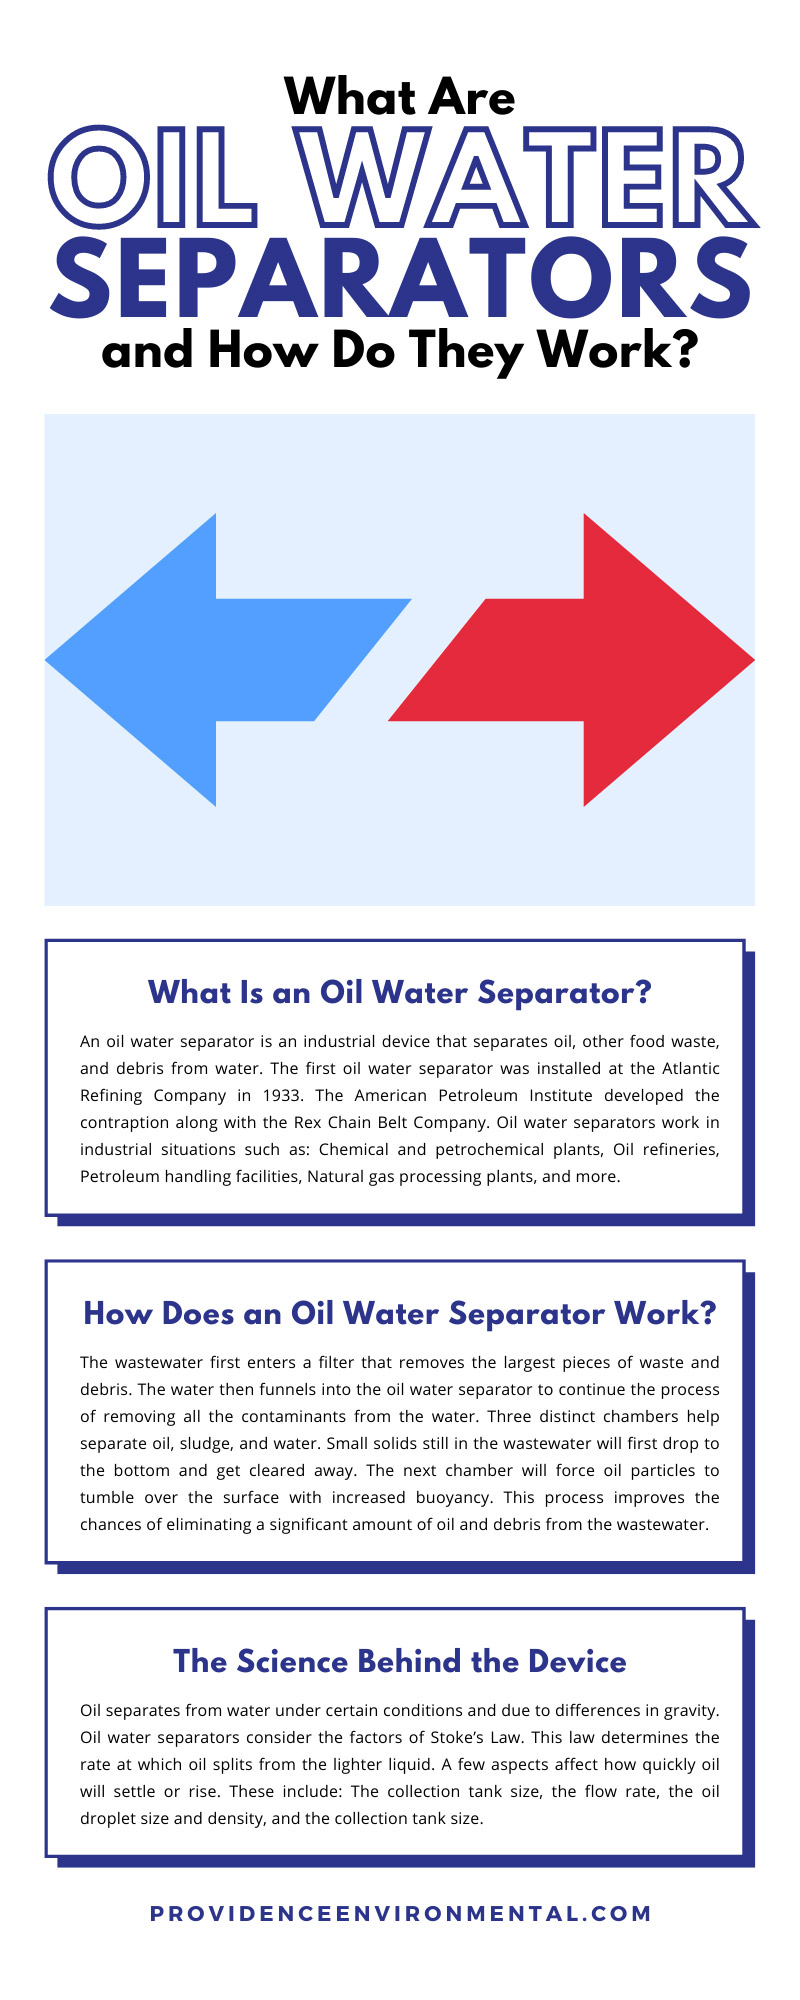 What Are Oil Water Separators and How Do They Work?